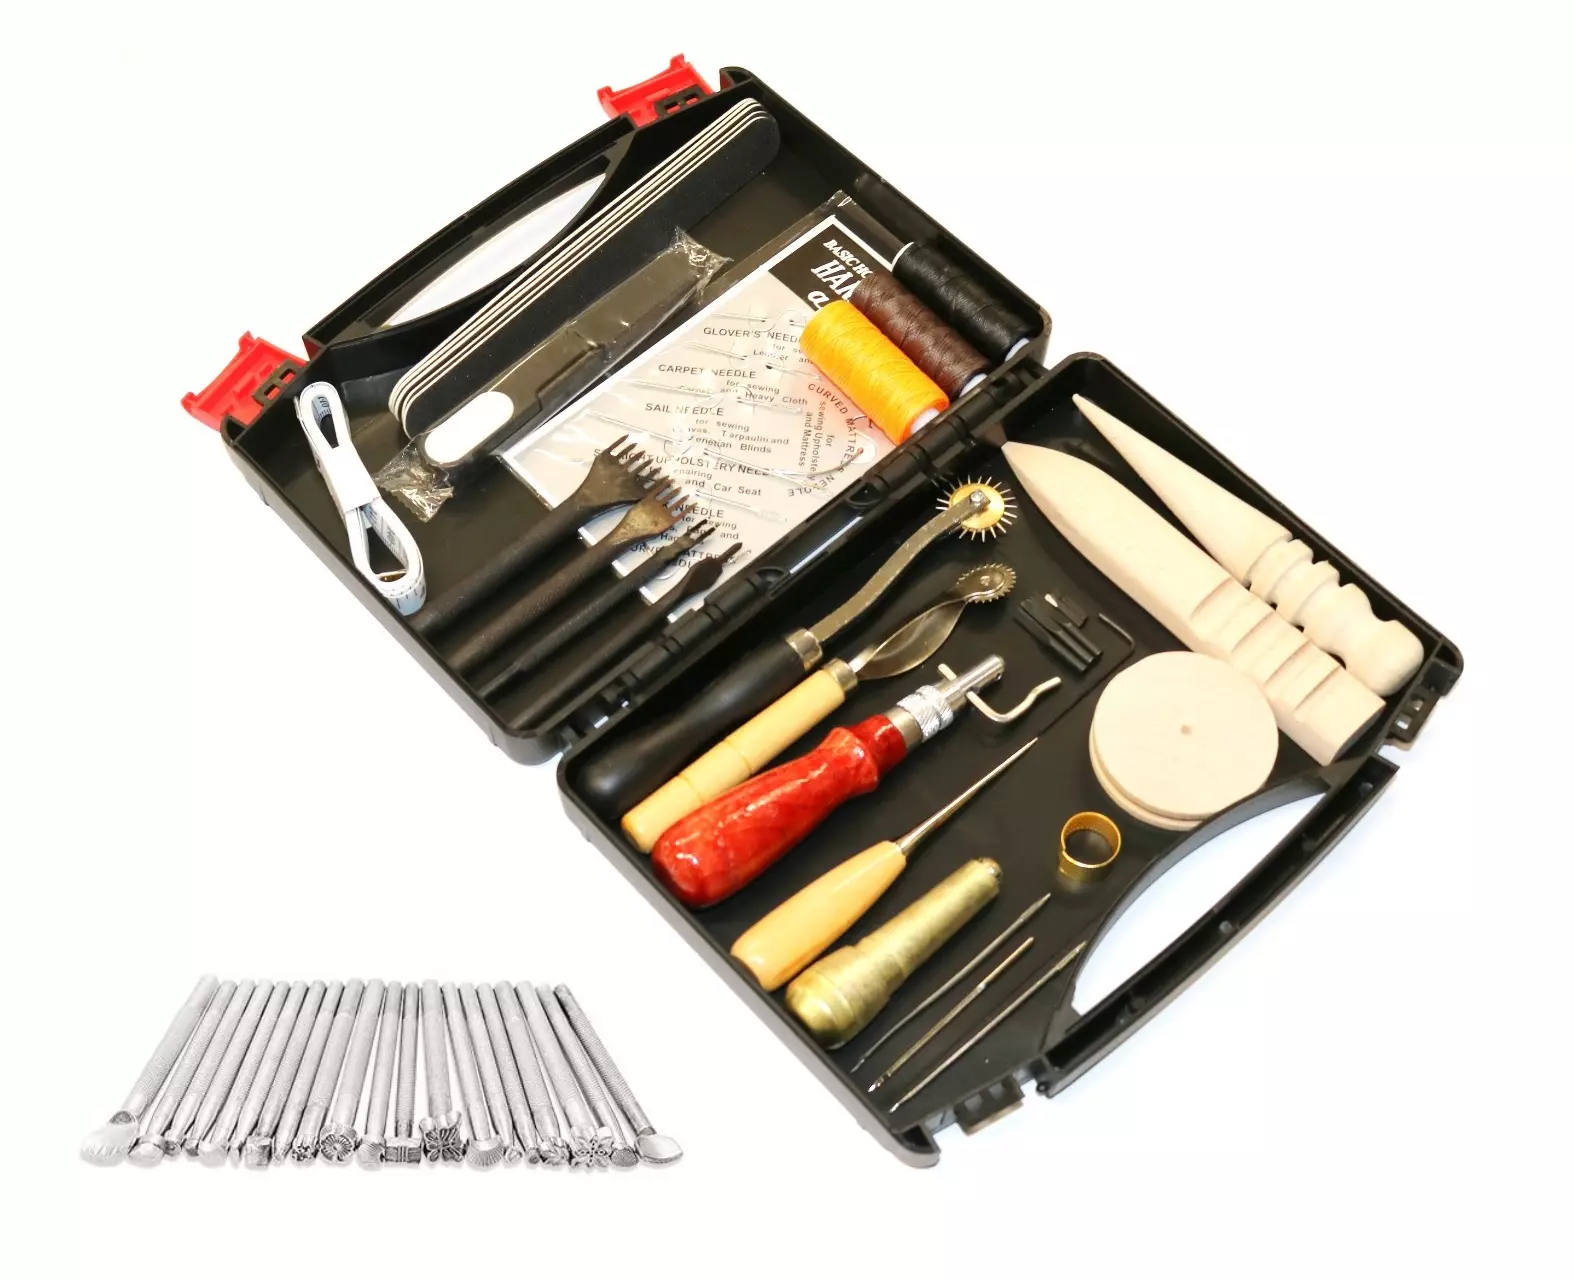 Leathercraft Tools 18piece Set Kit Leather Working Project -  Norway